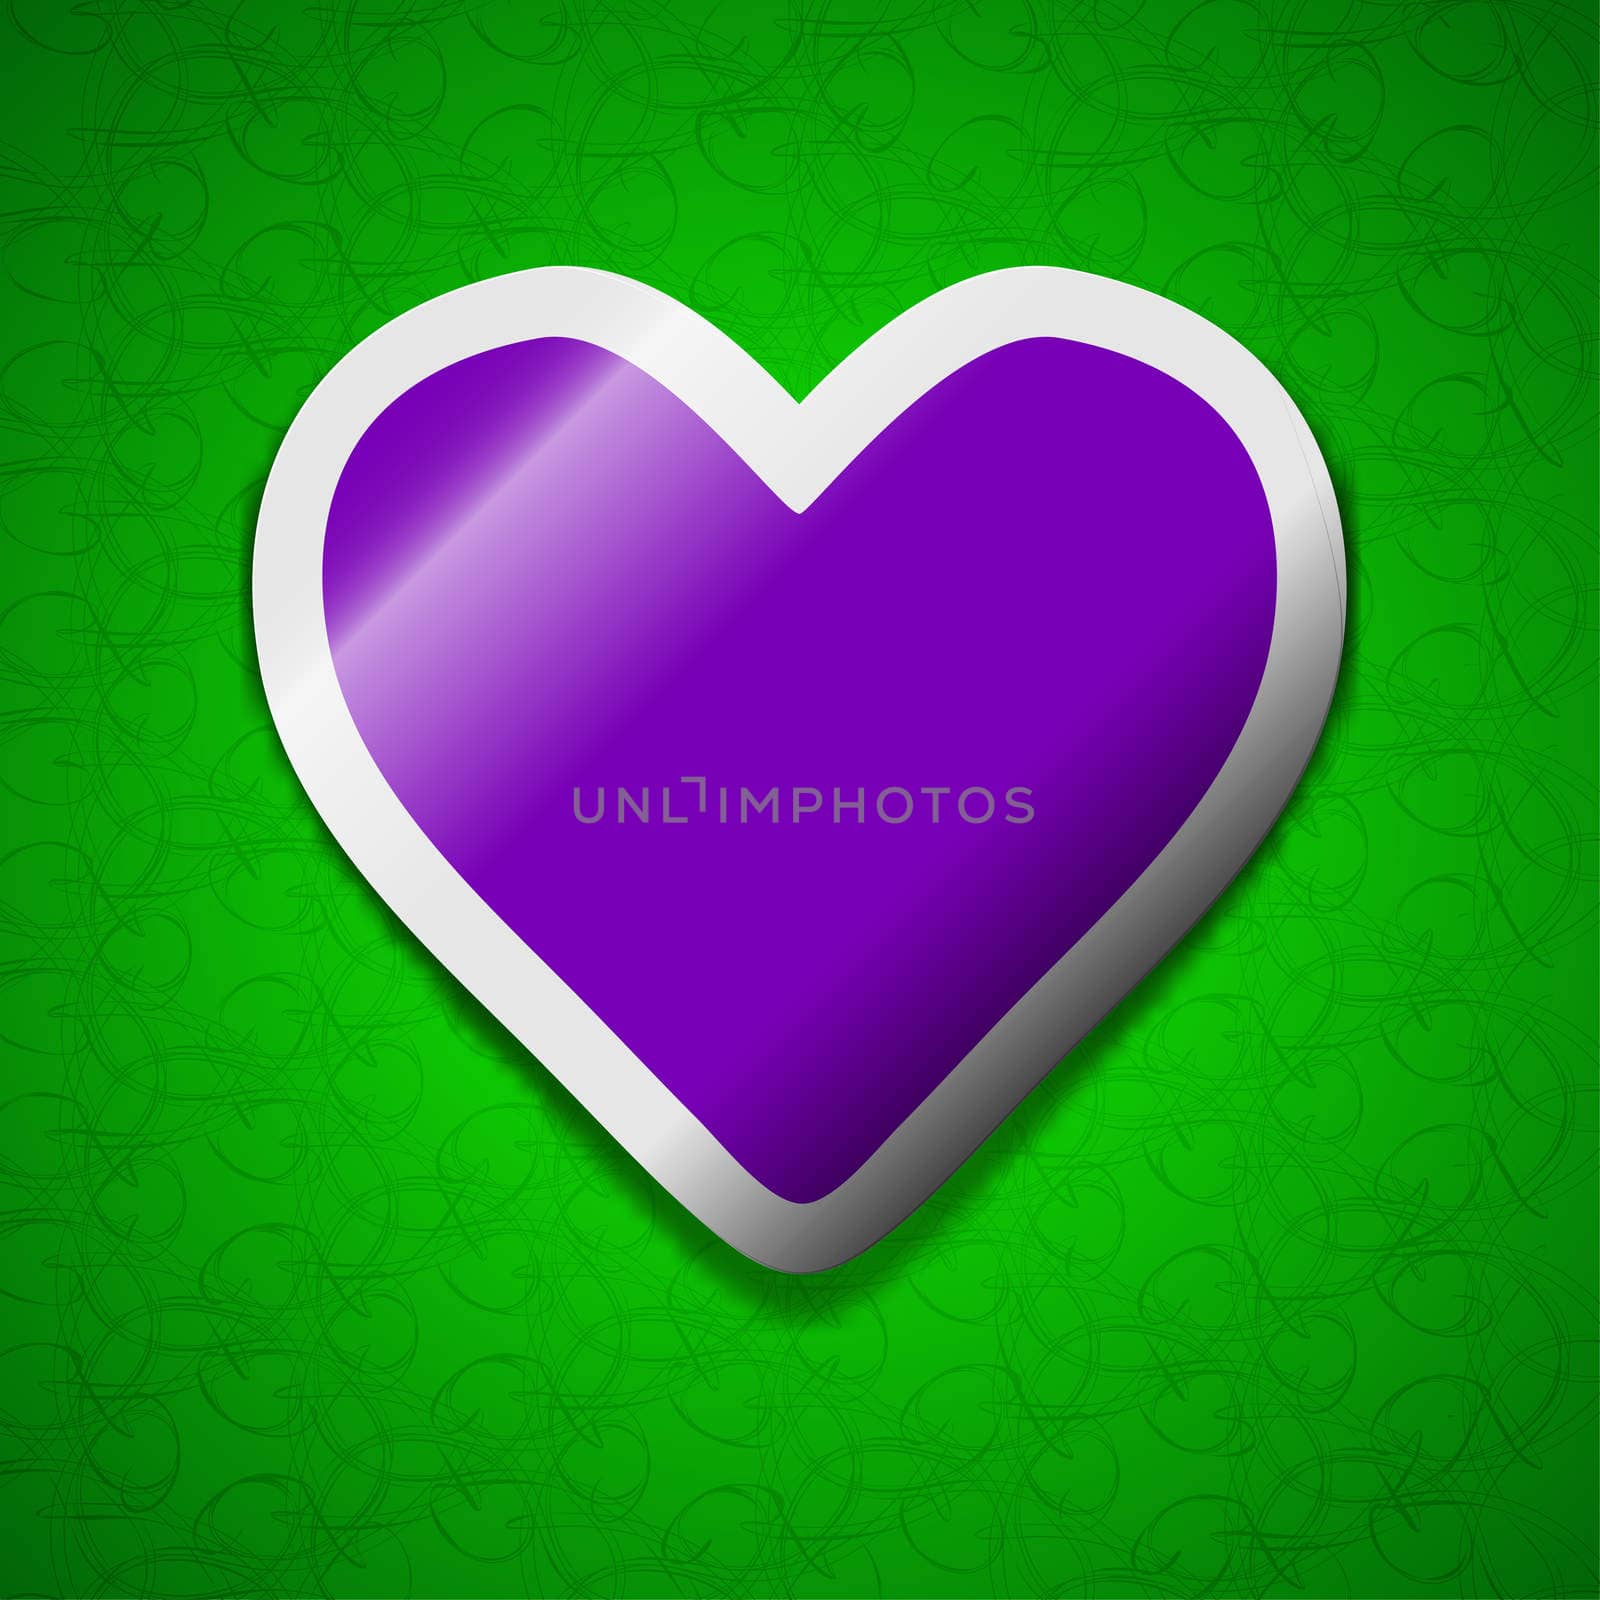 Heart icon sign. Symbol chic colored sticky label on green background. illustration